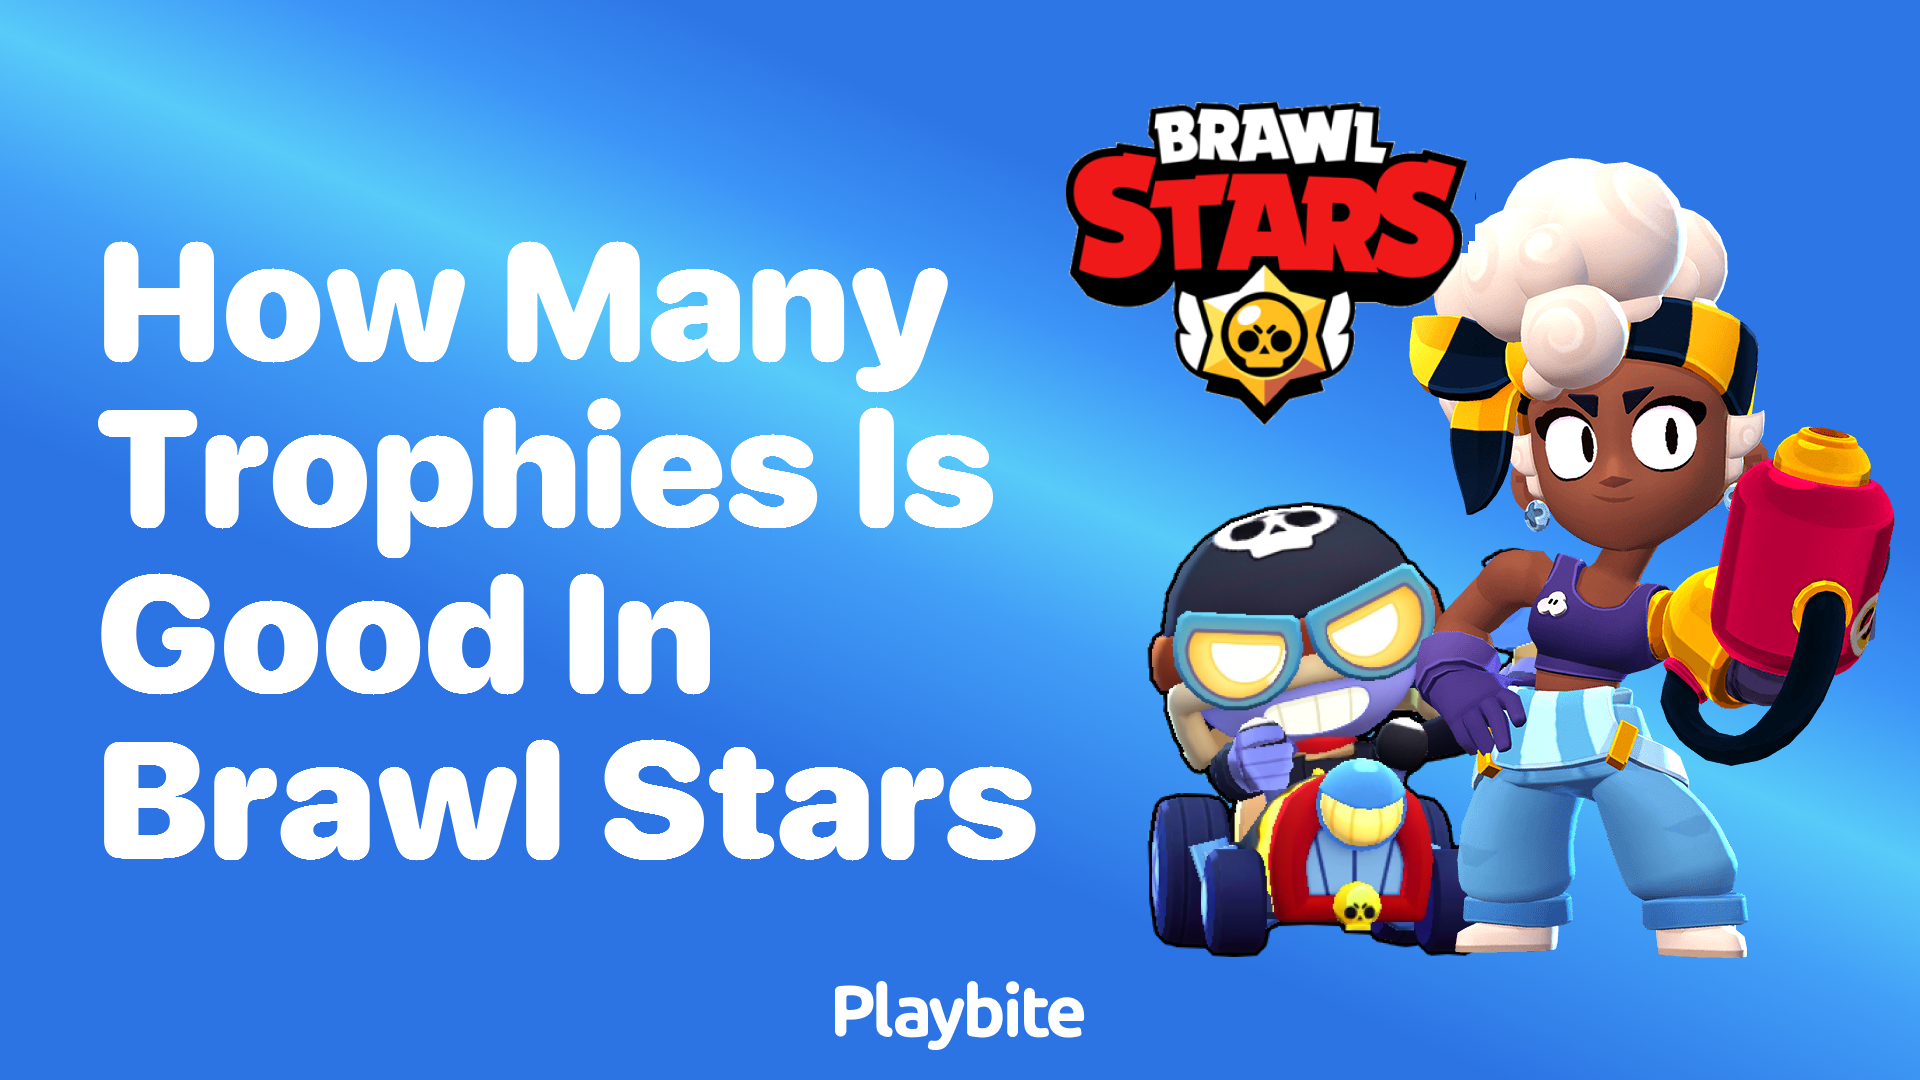 How Many Trophies Is Considered Good in Brawl Stars?